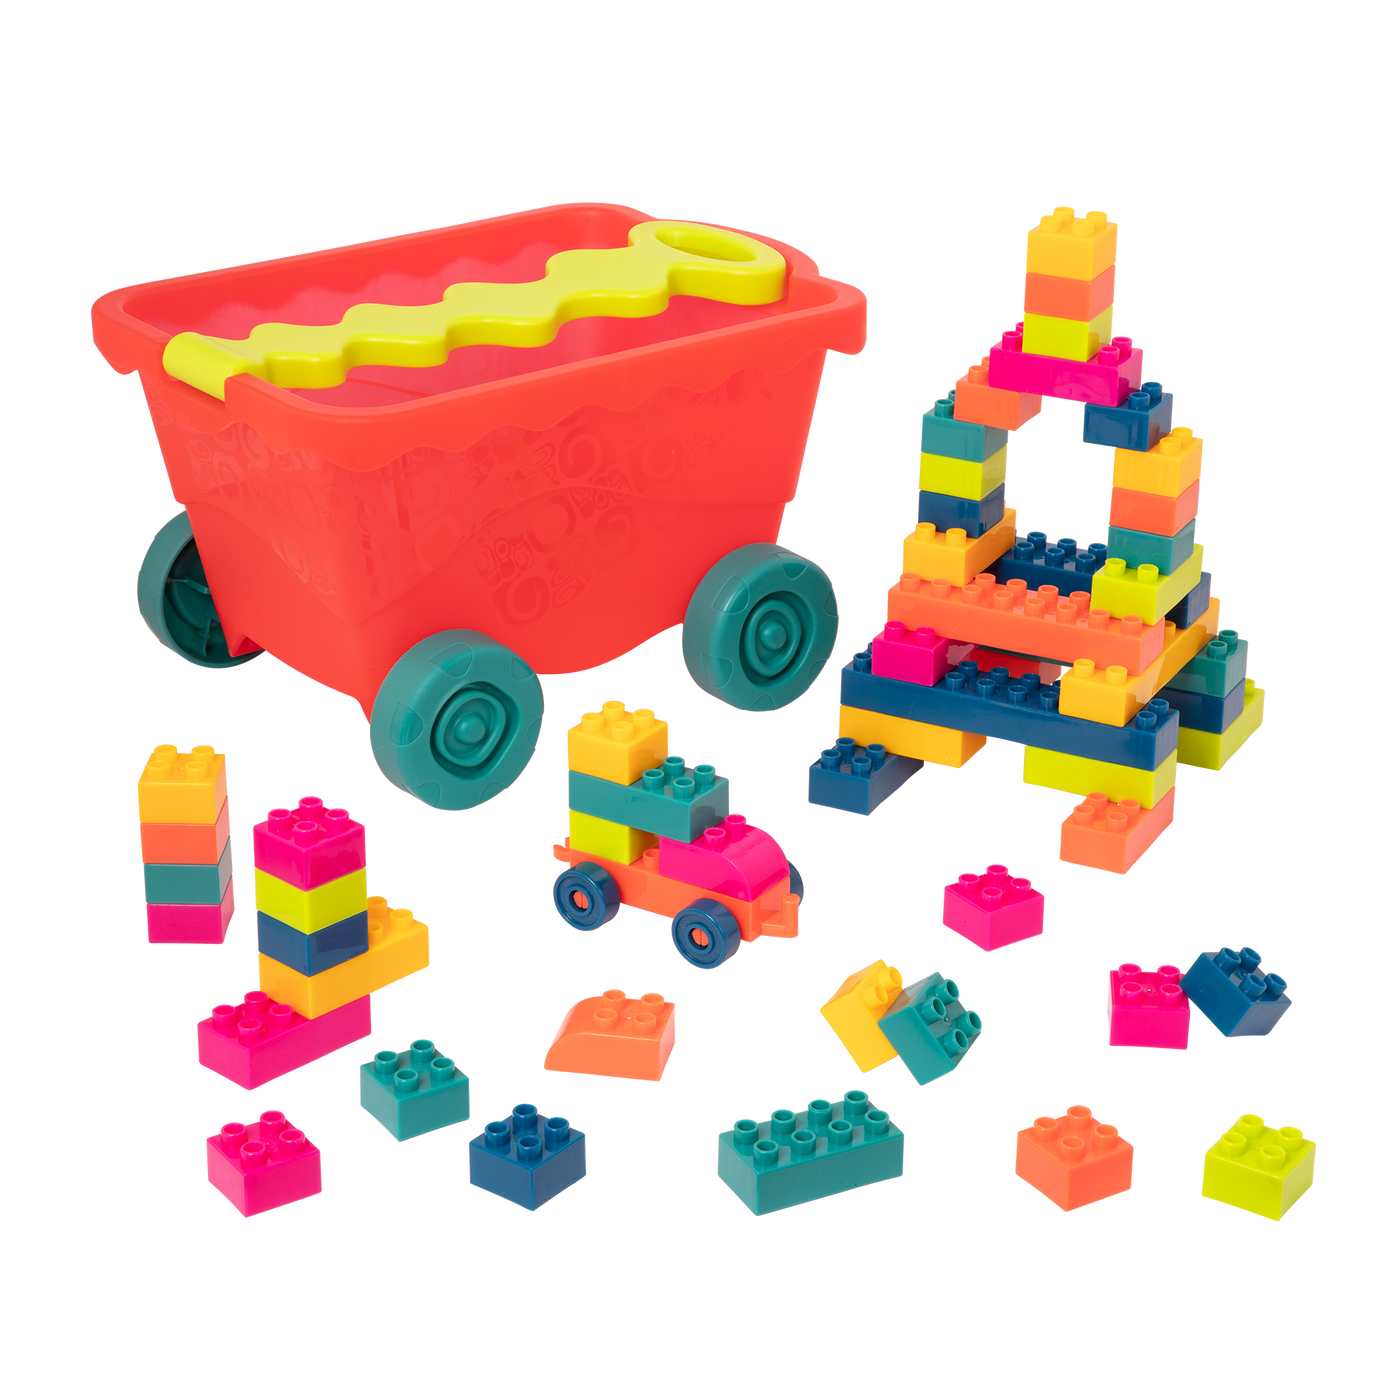 Colorful building blocks and a wagon.